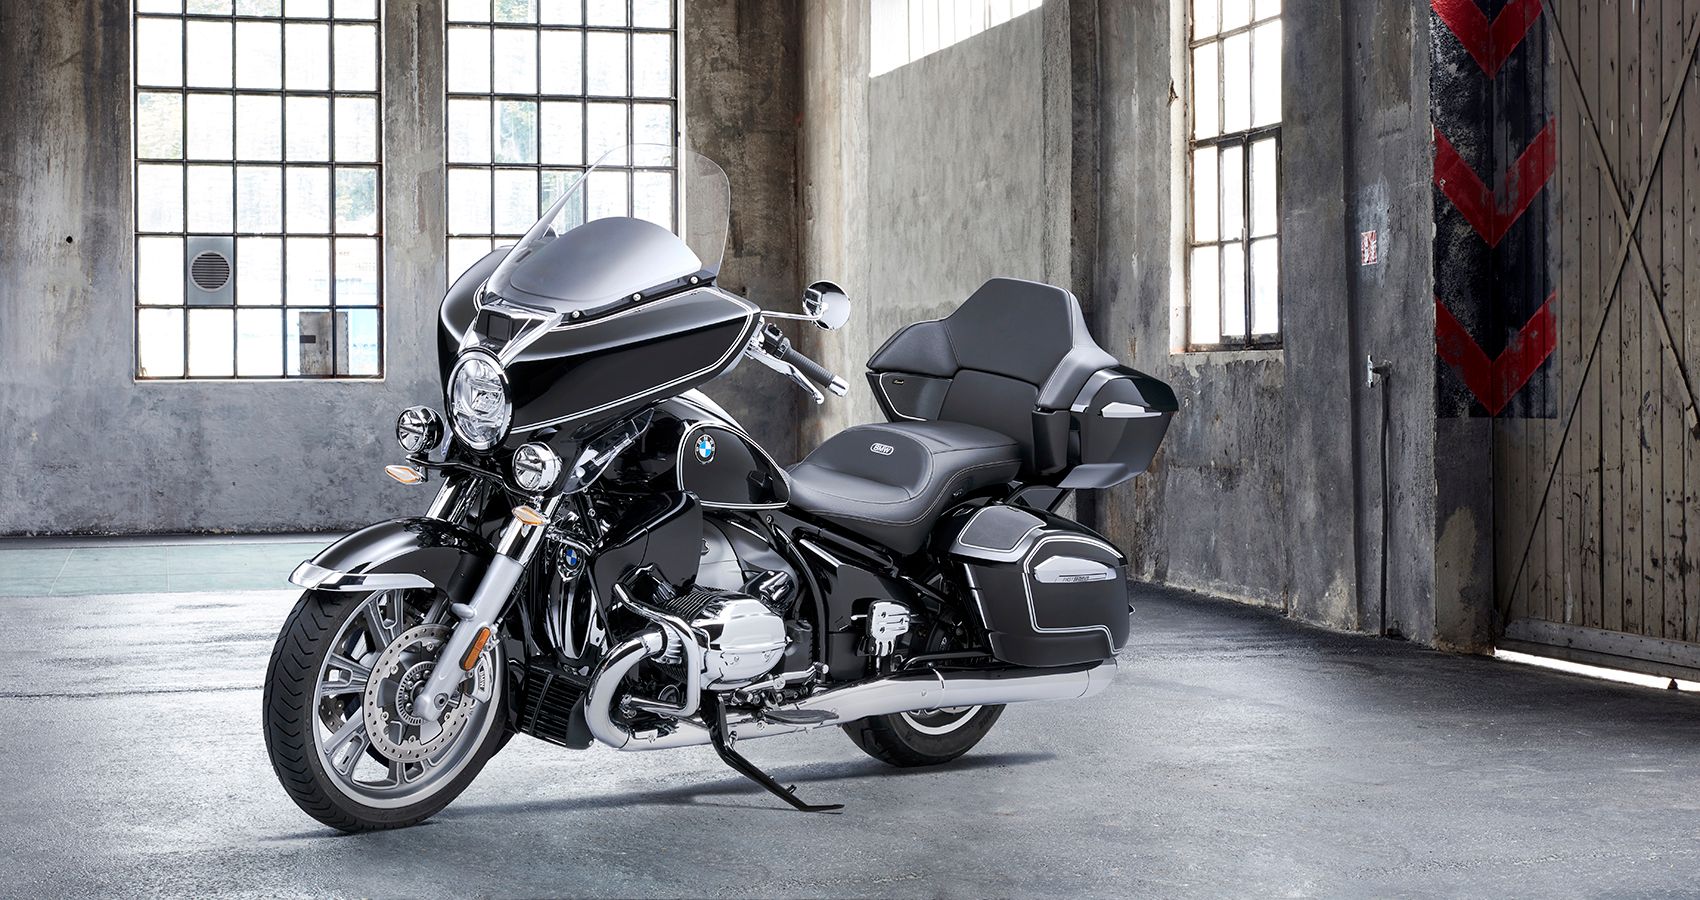 The New BMW R 18 Transcontinental Is A Luxurious Grand American Tourer